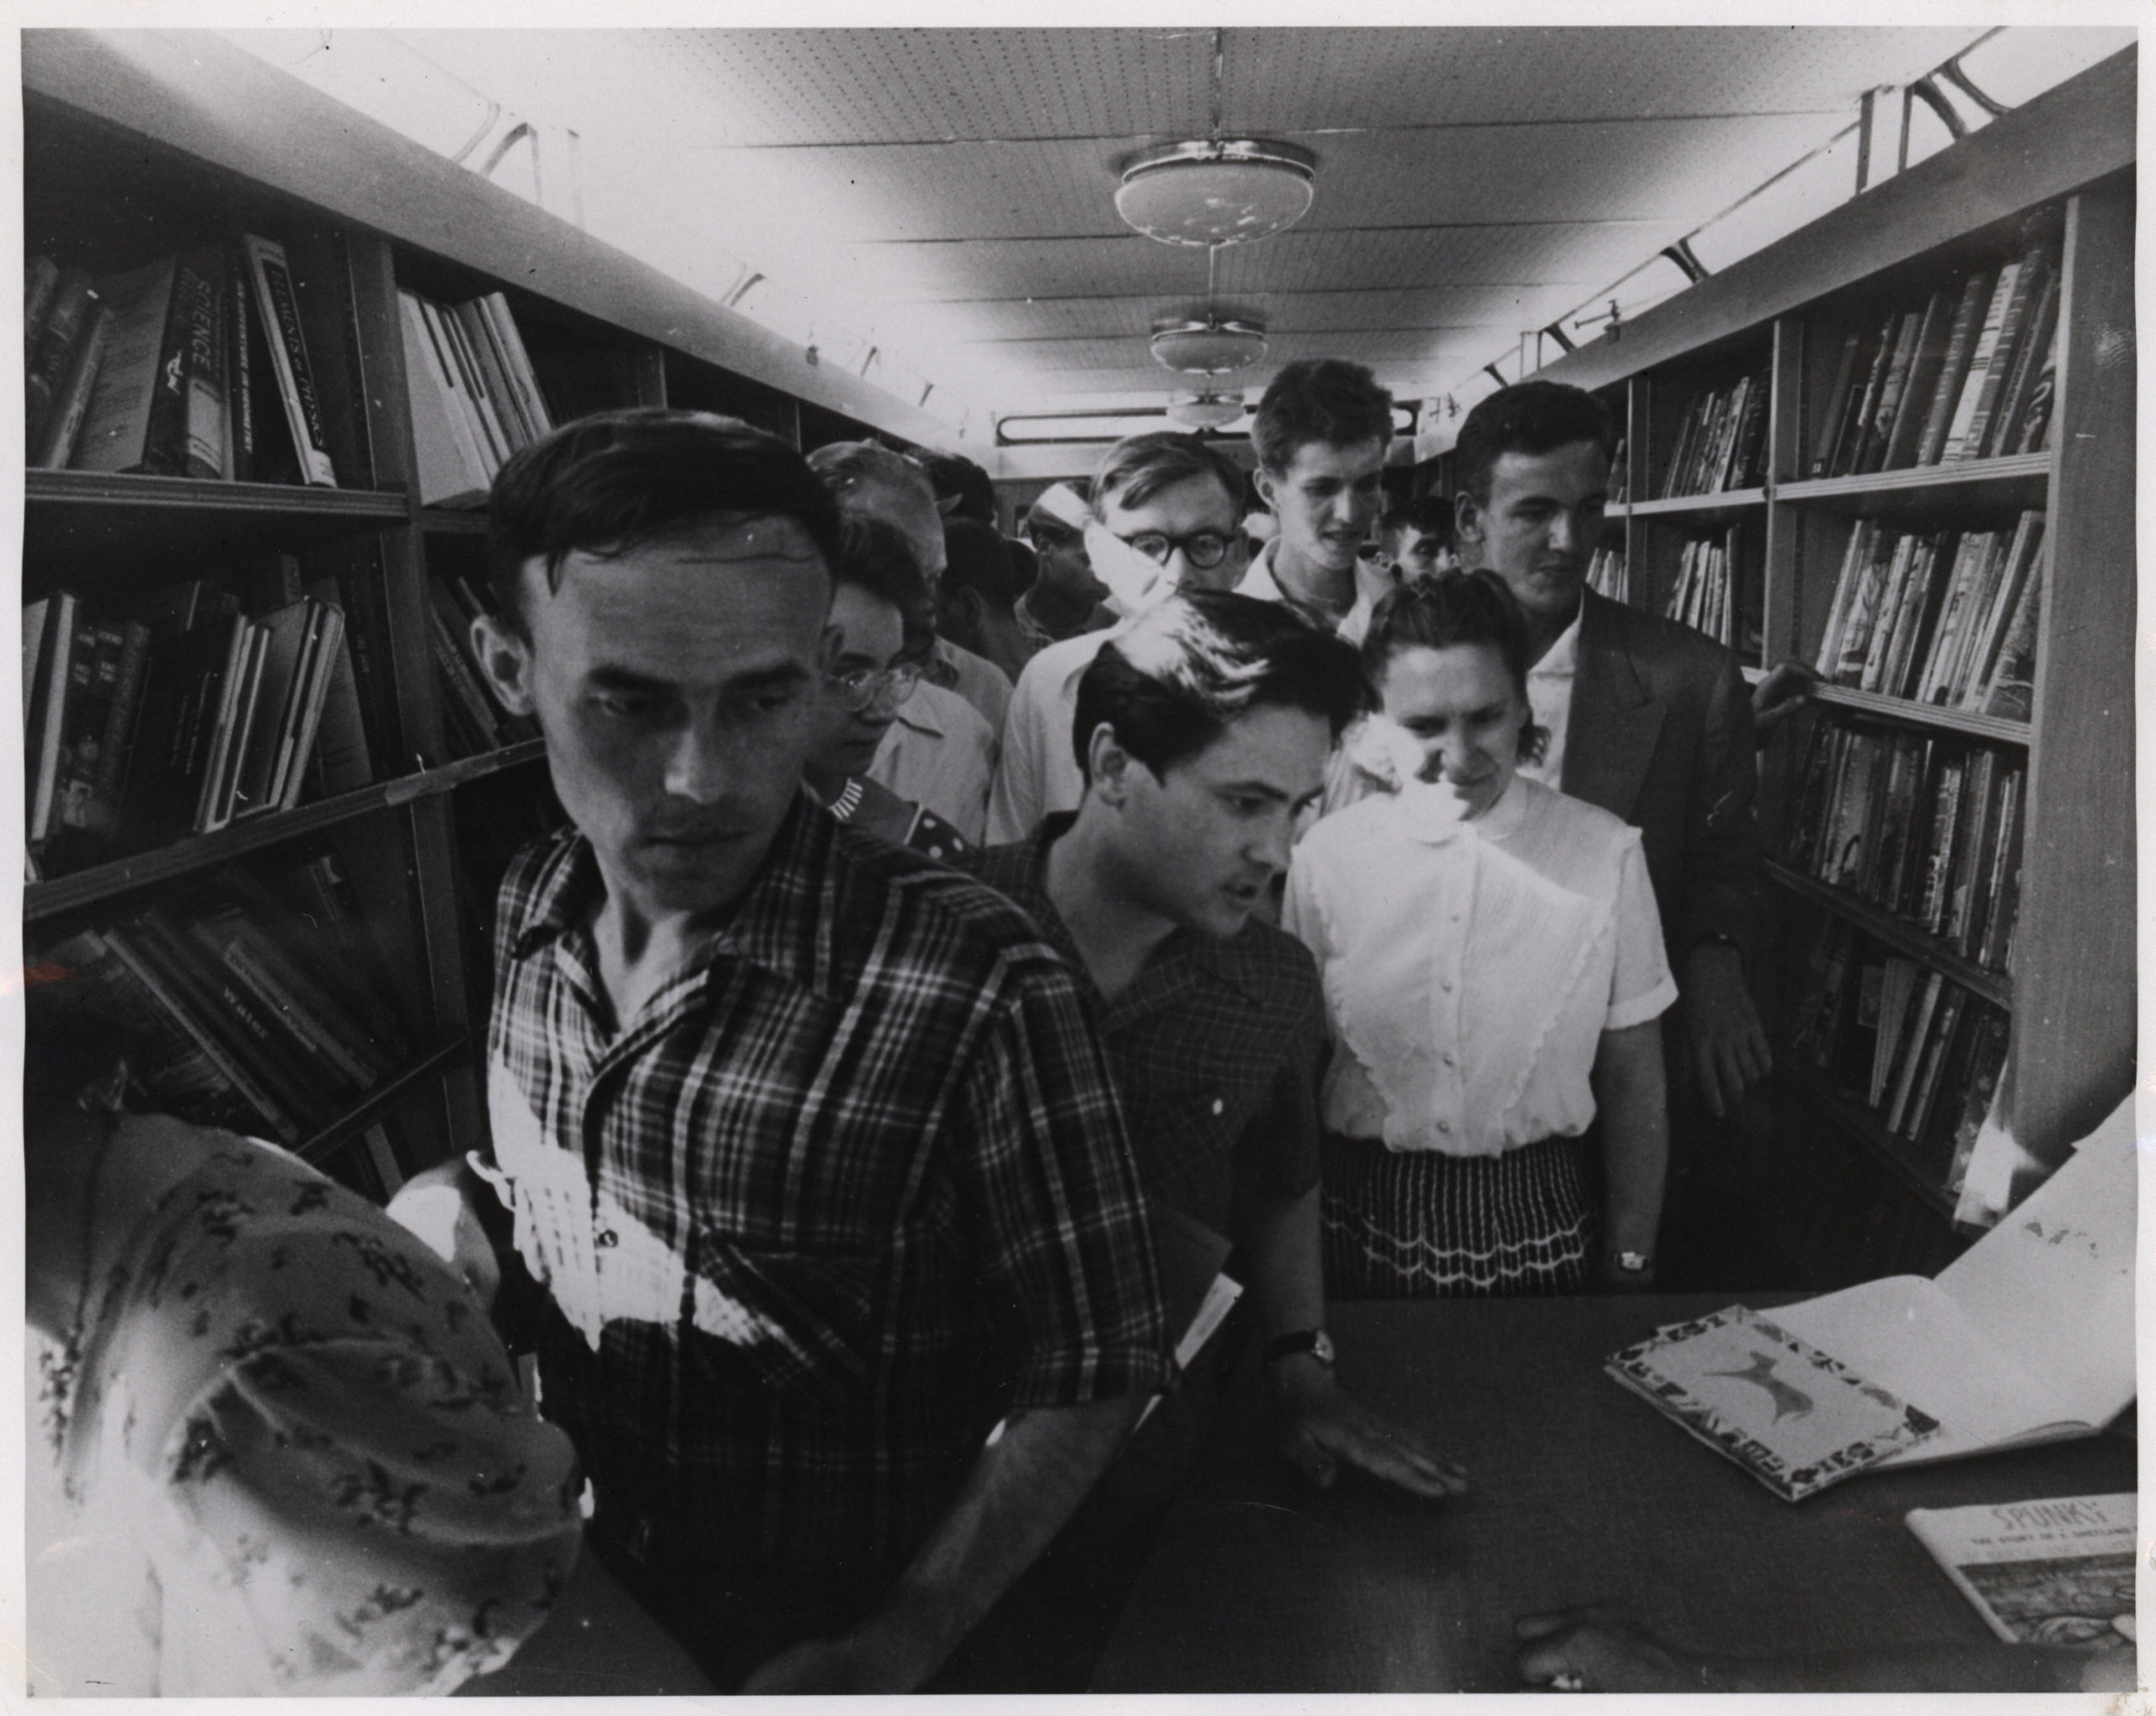 Muscovites crowd into the Delmar Public Library bookmobile at the 1959 American National Exhibition in Moscow (Bethlehem Public Library archives)